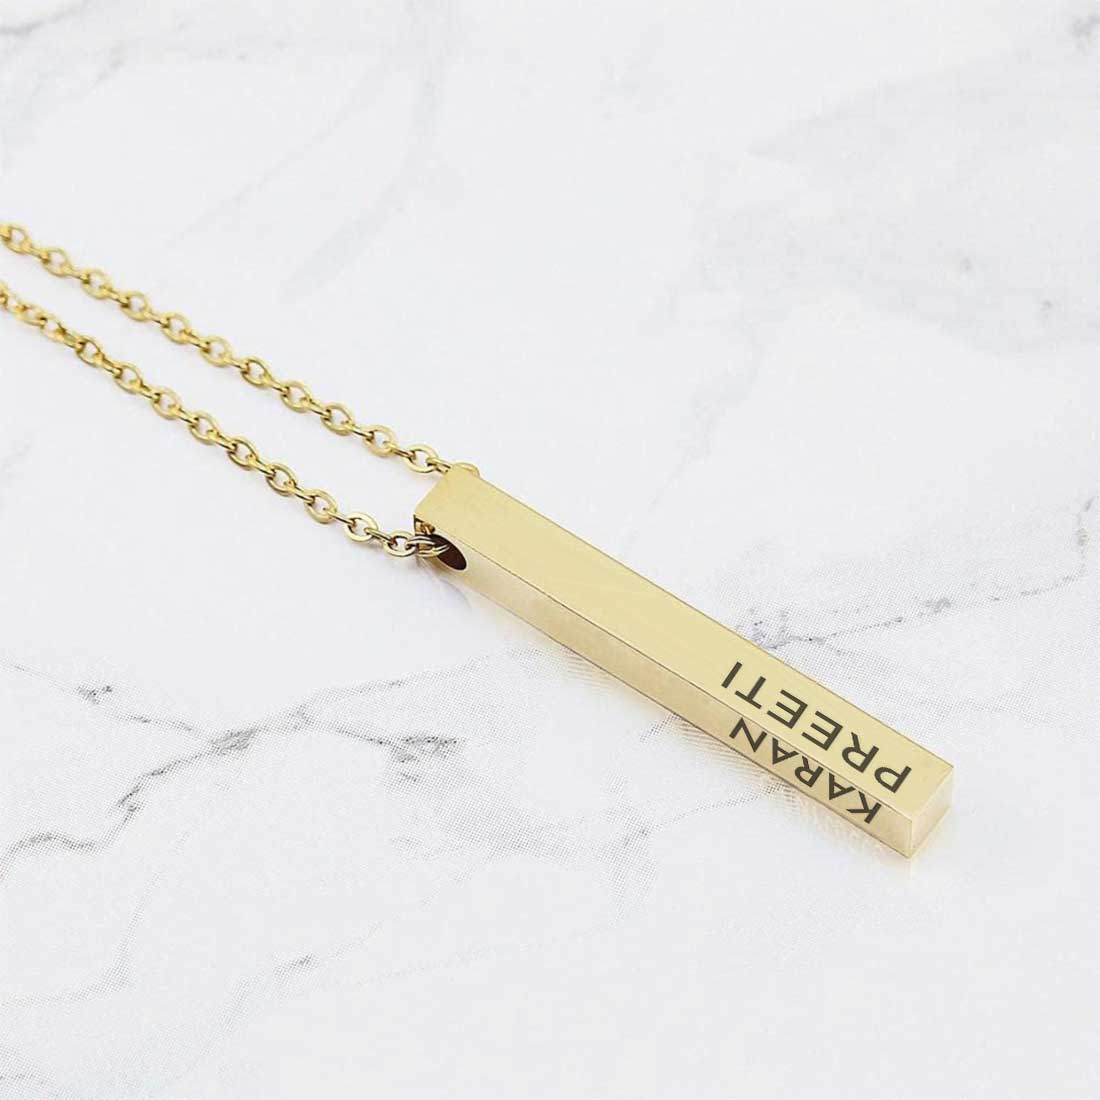 Custom Engraved Pendant with Chain Gift for Women - Add Name